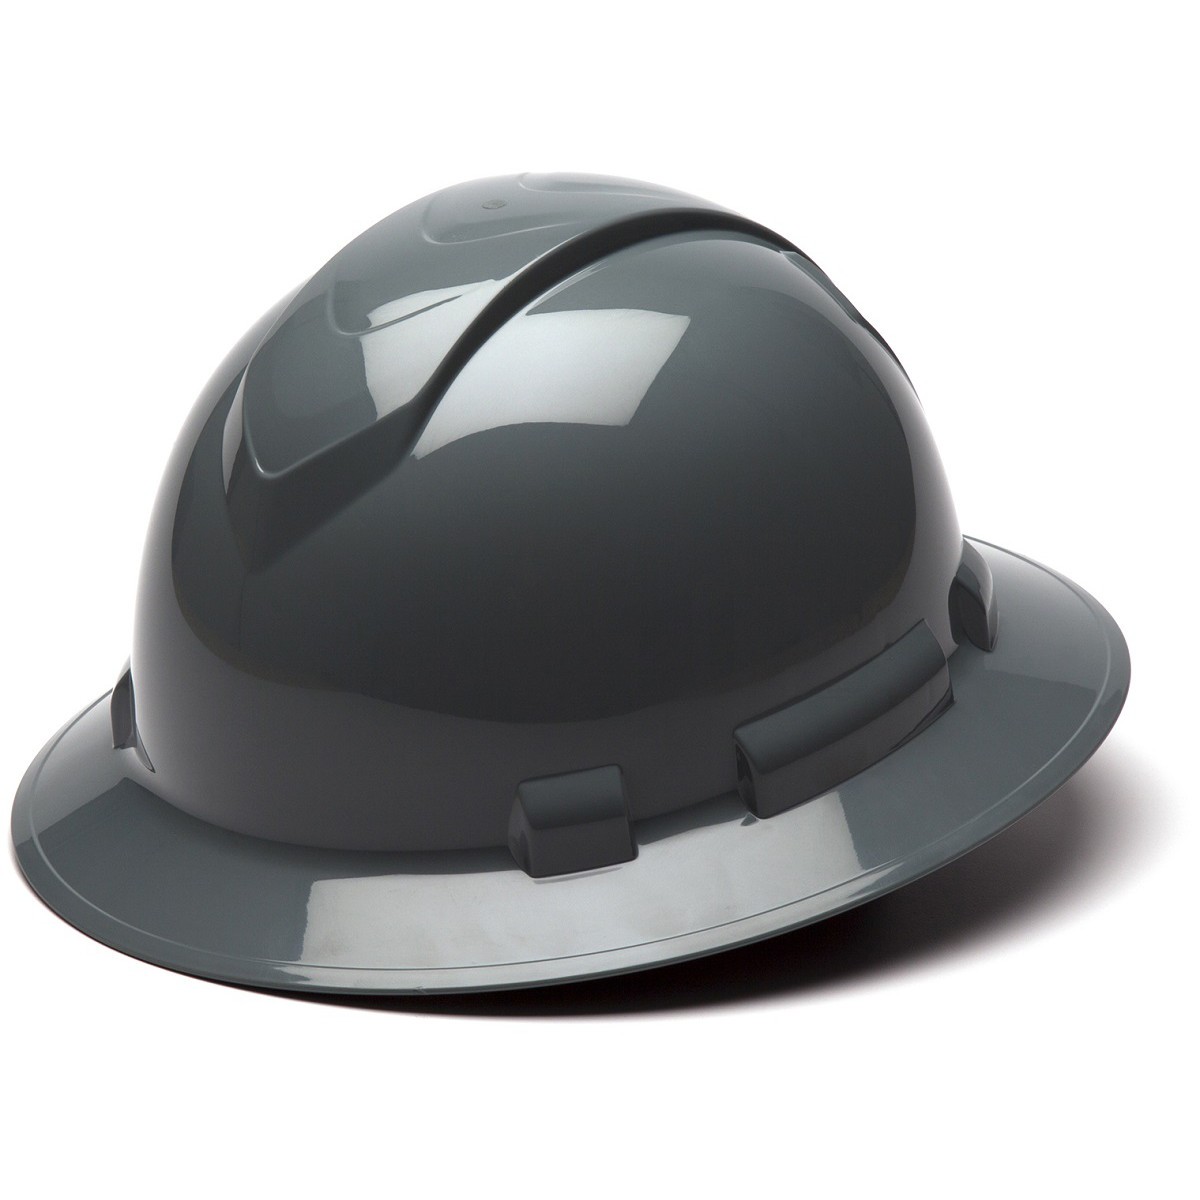 Pyramex Ridgeline Full Brim Hard Hat with 4 Point Ratchet Suspension from Columbia Safety